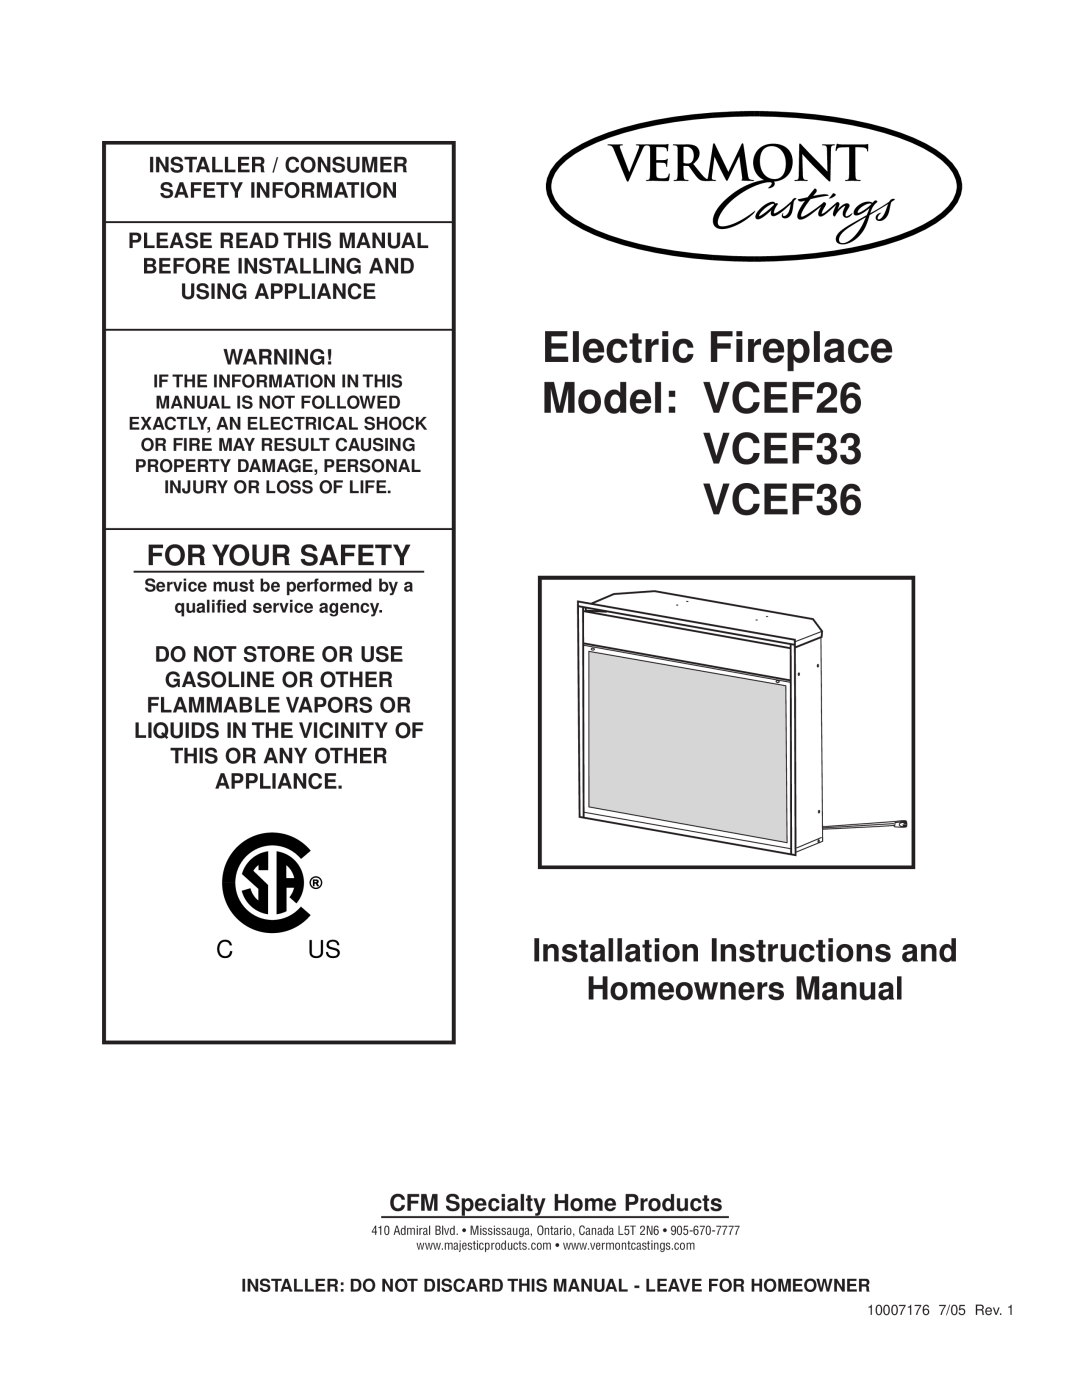 Vermont Casting installation instructions Electric Fireplace Model VCEF26 VCEF33 VCEF36, CFM Specialty Home Products 